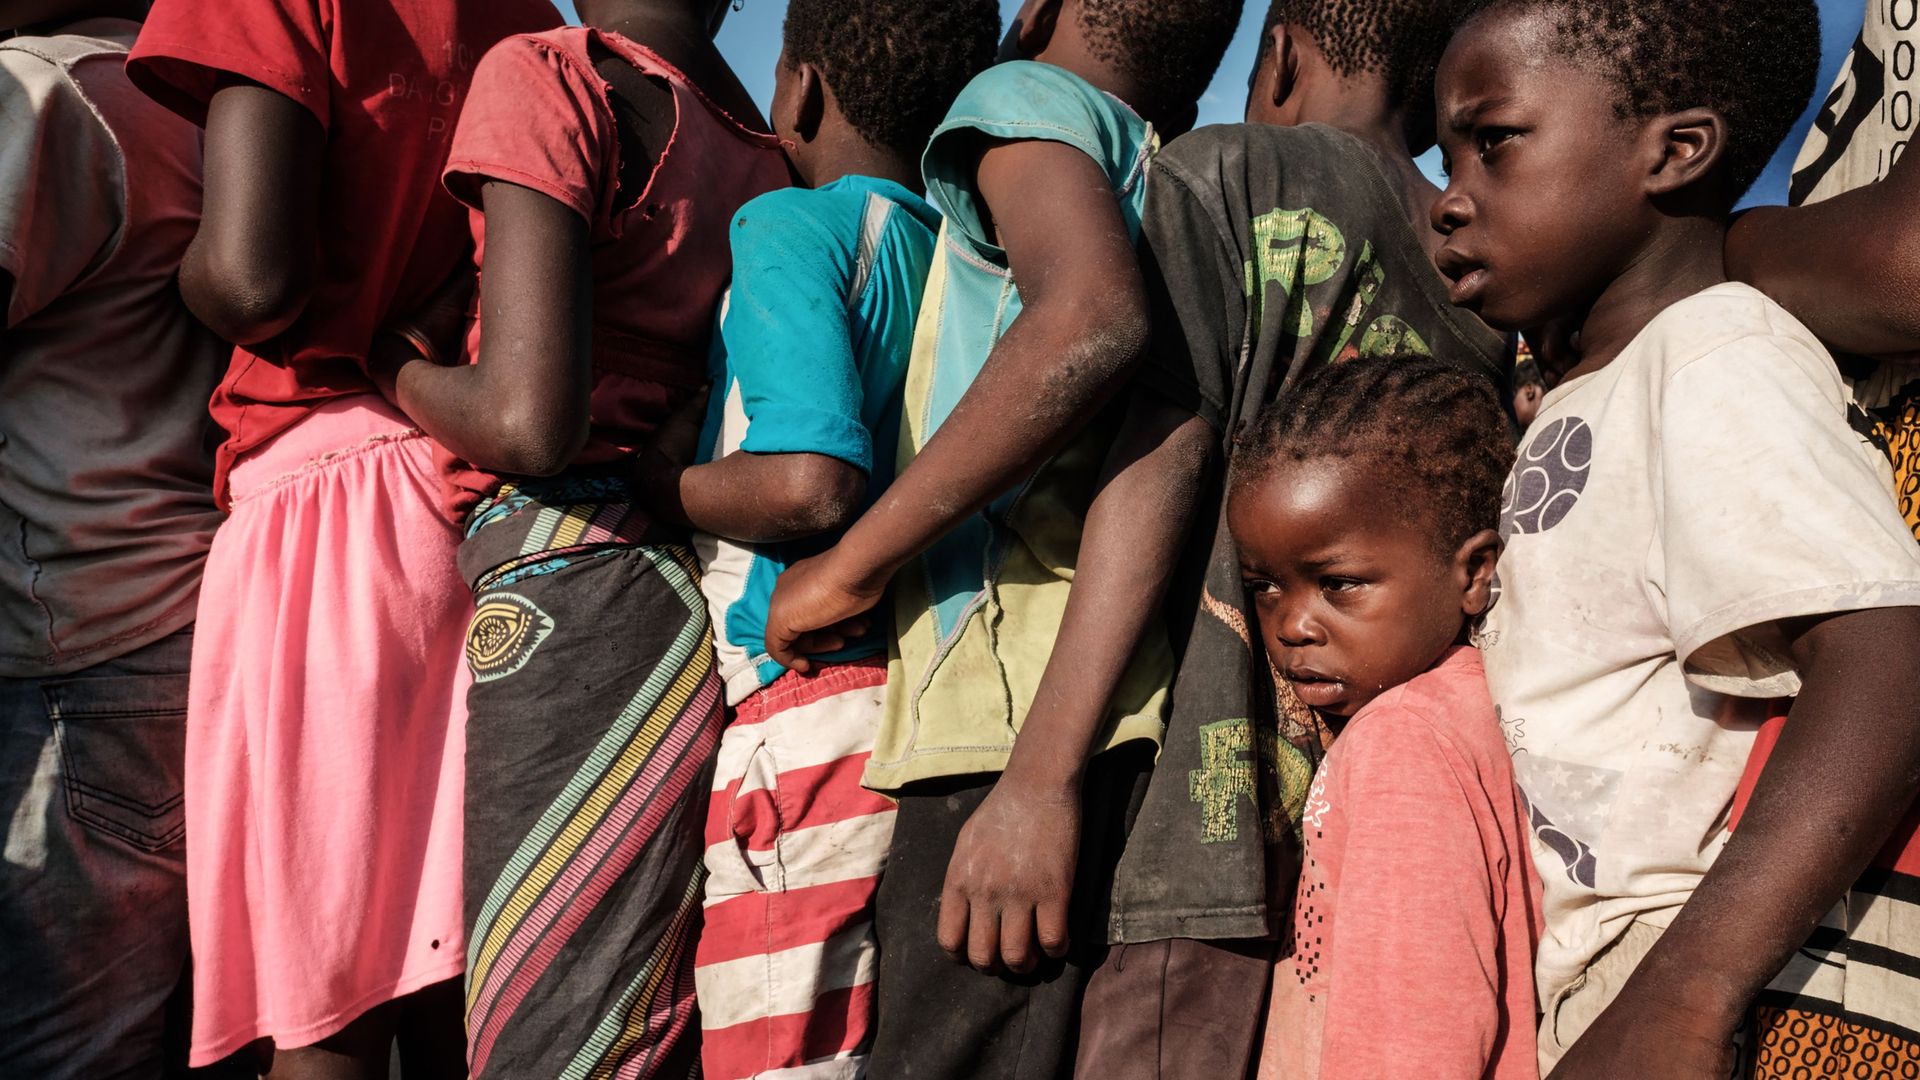 Children in Mozambique wait in line for food following Cyclone Idai